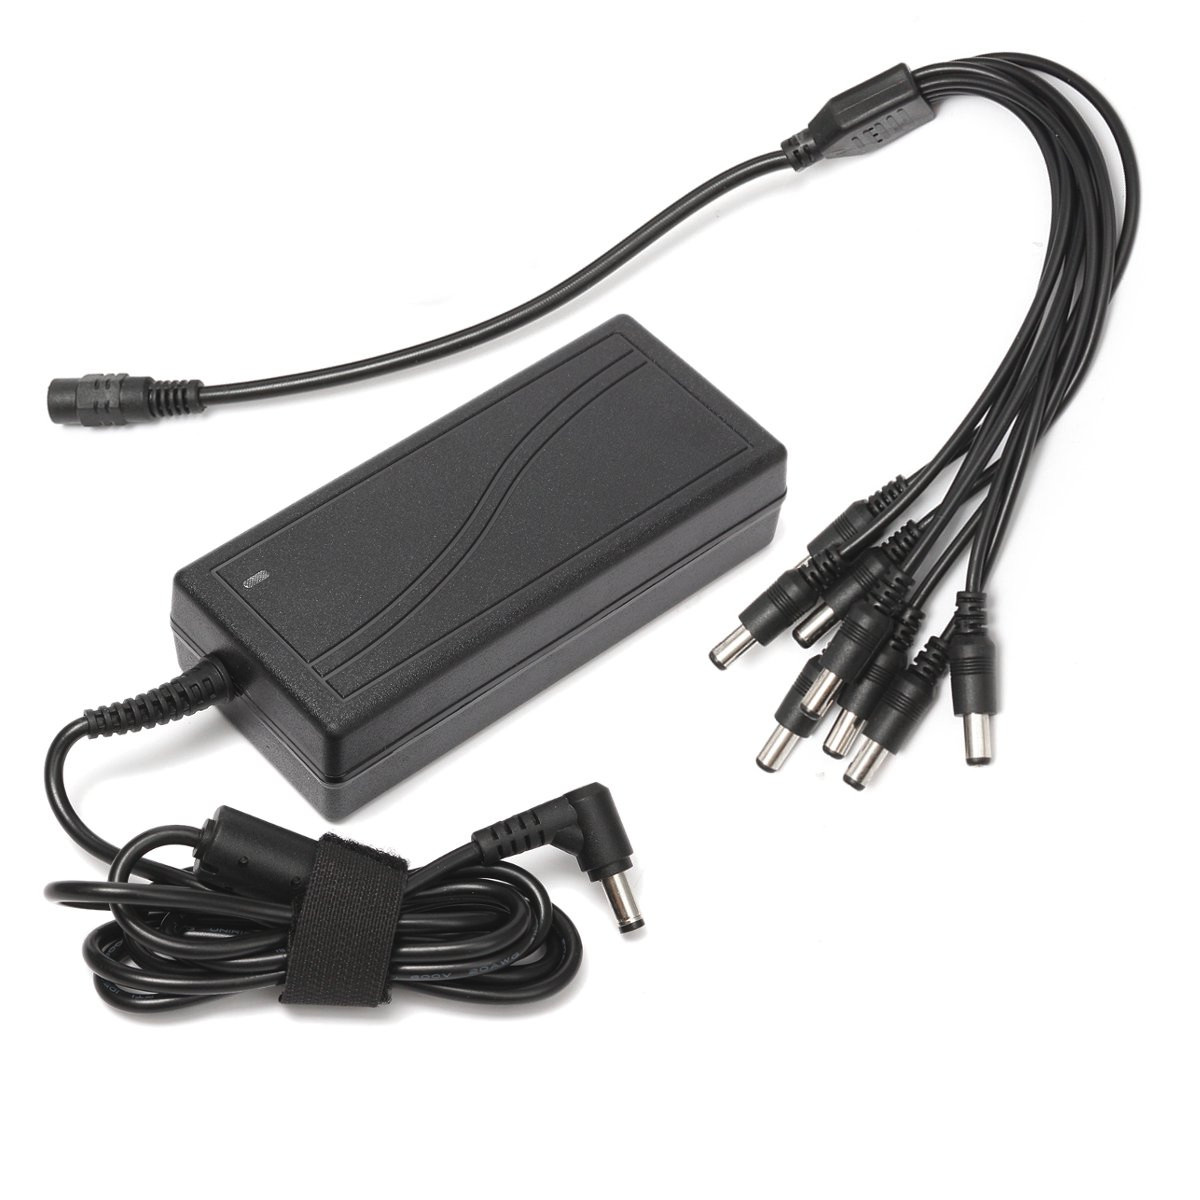 DC12V 4A 5A 6A Power Supply Adapter 8 Split Cable For CCTV Security Camera 